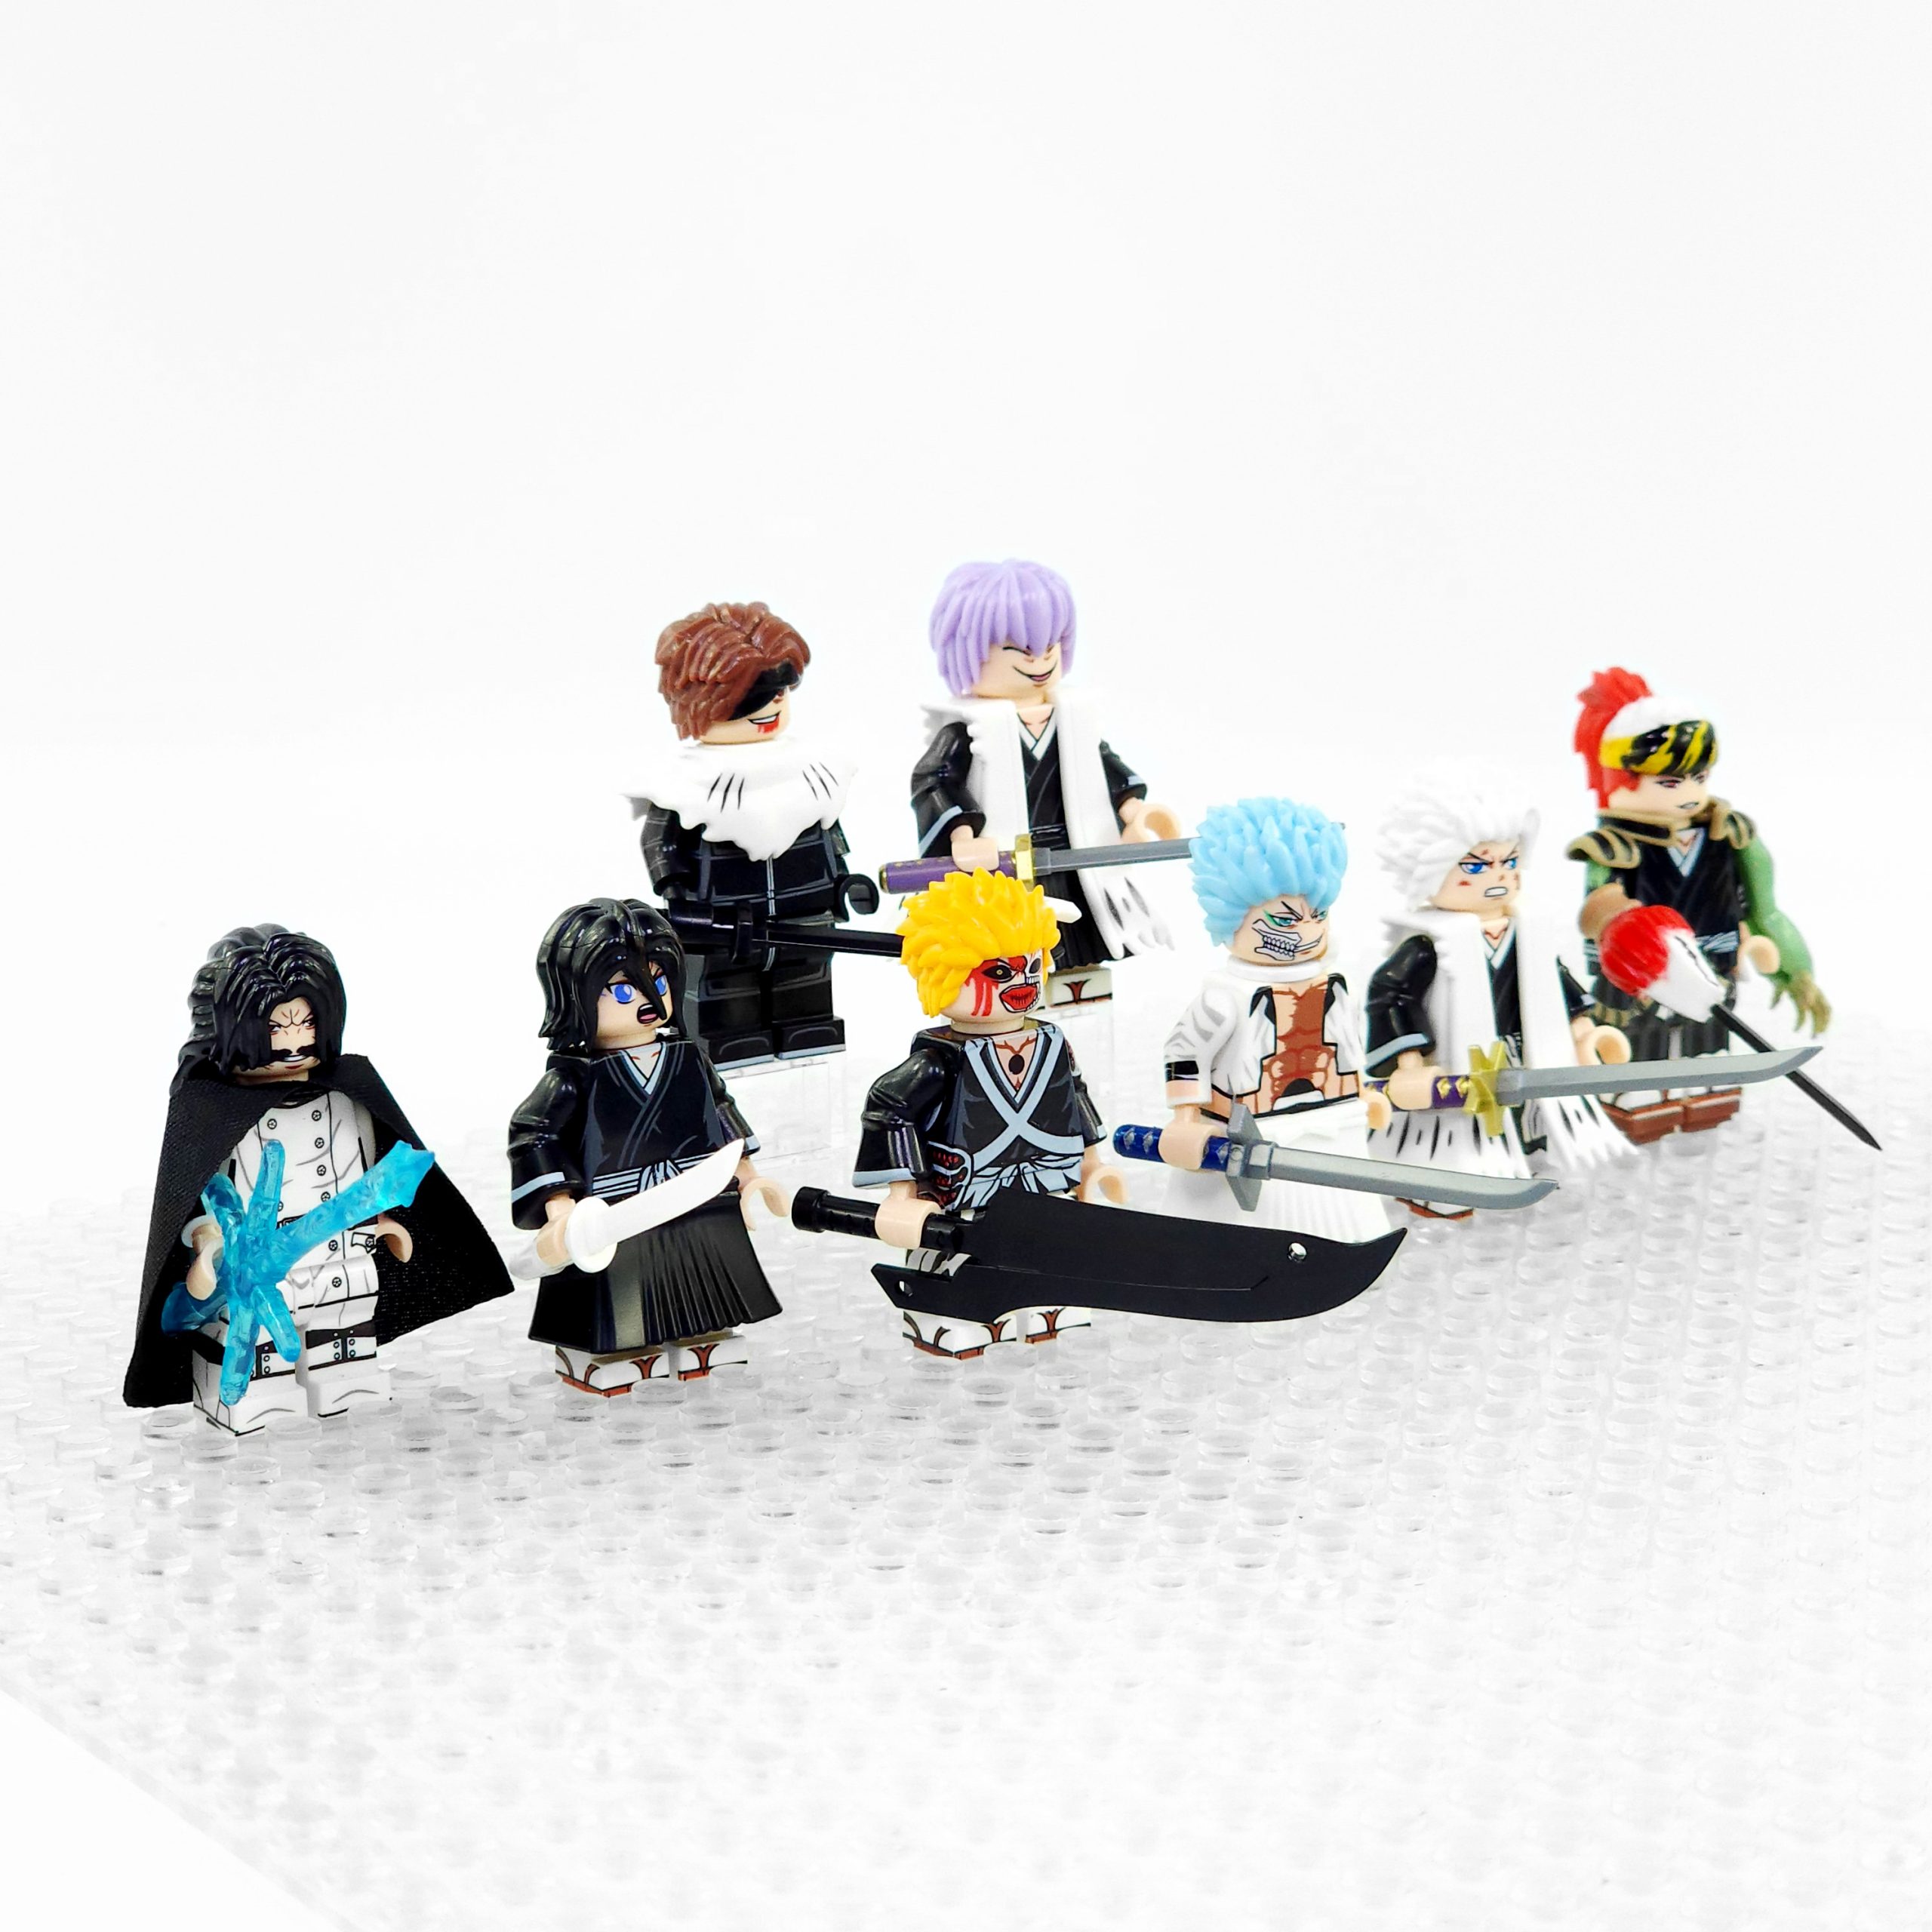 Bleach Anime Series Minifigure Set of 8pcs With Weapons & Accessories